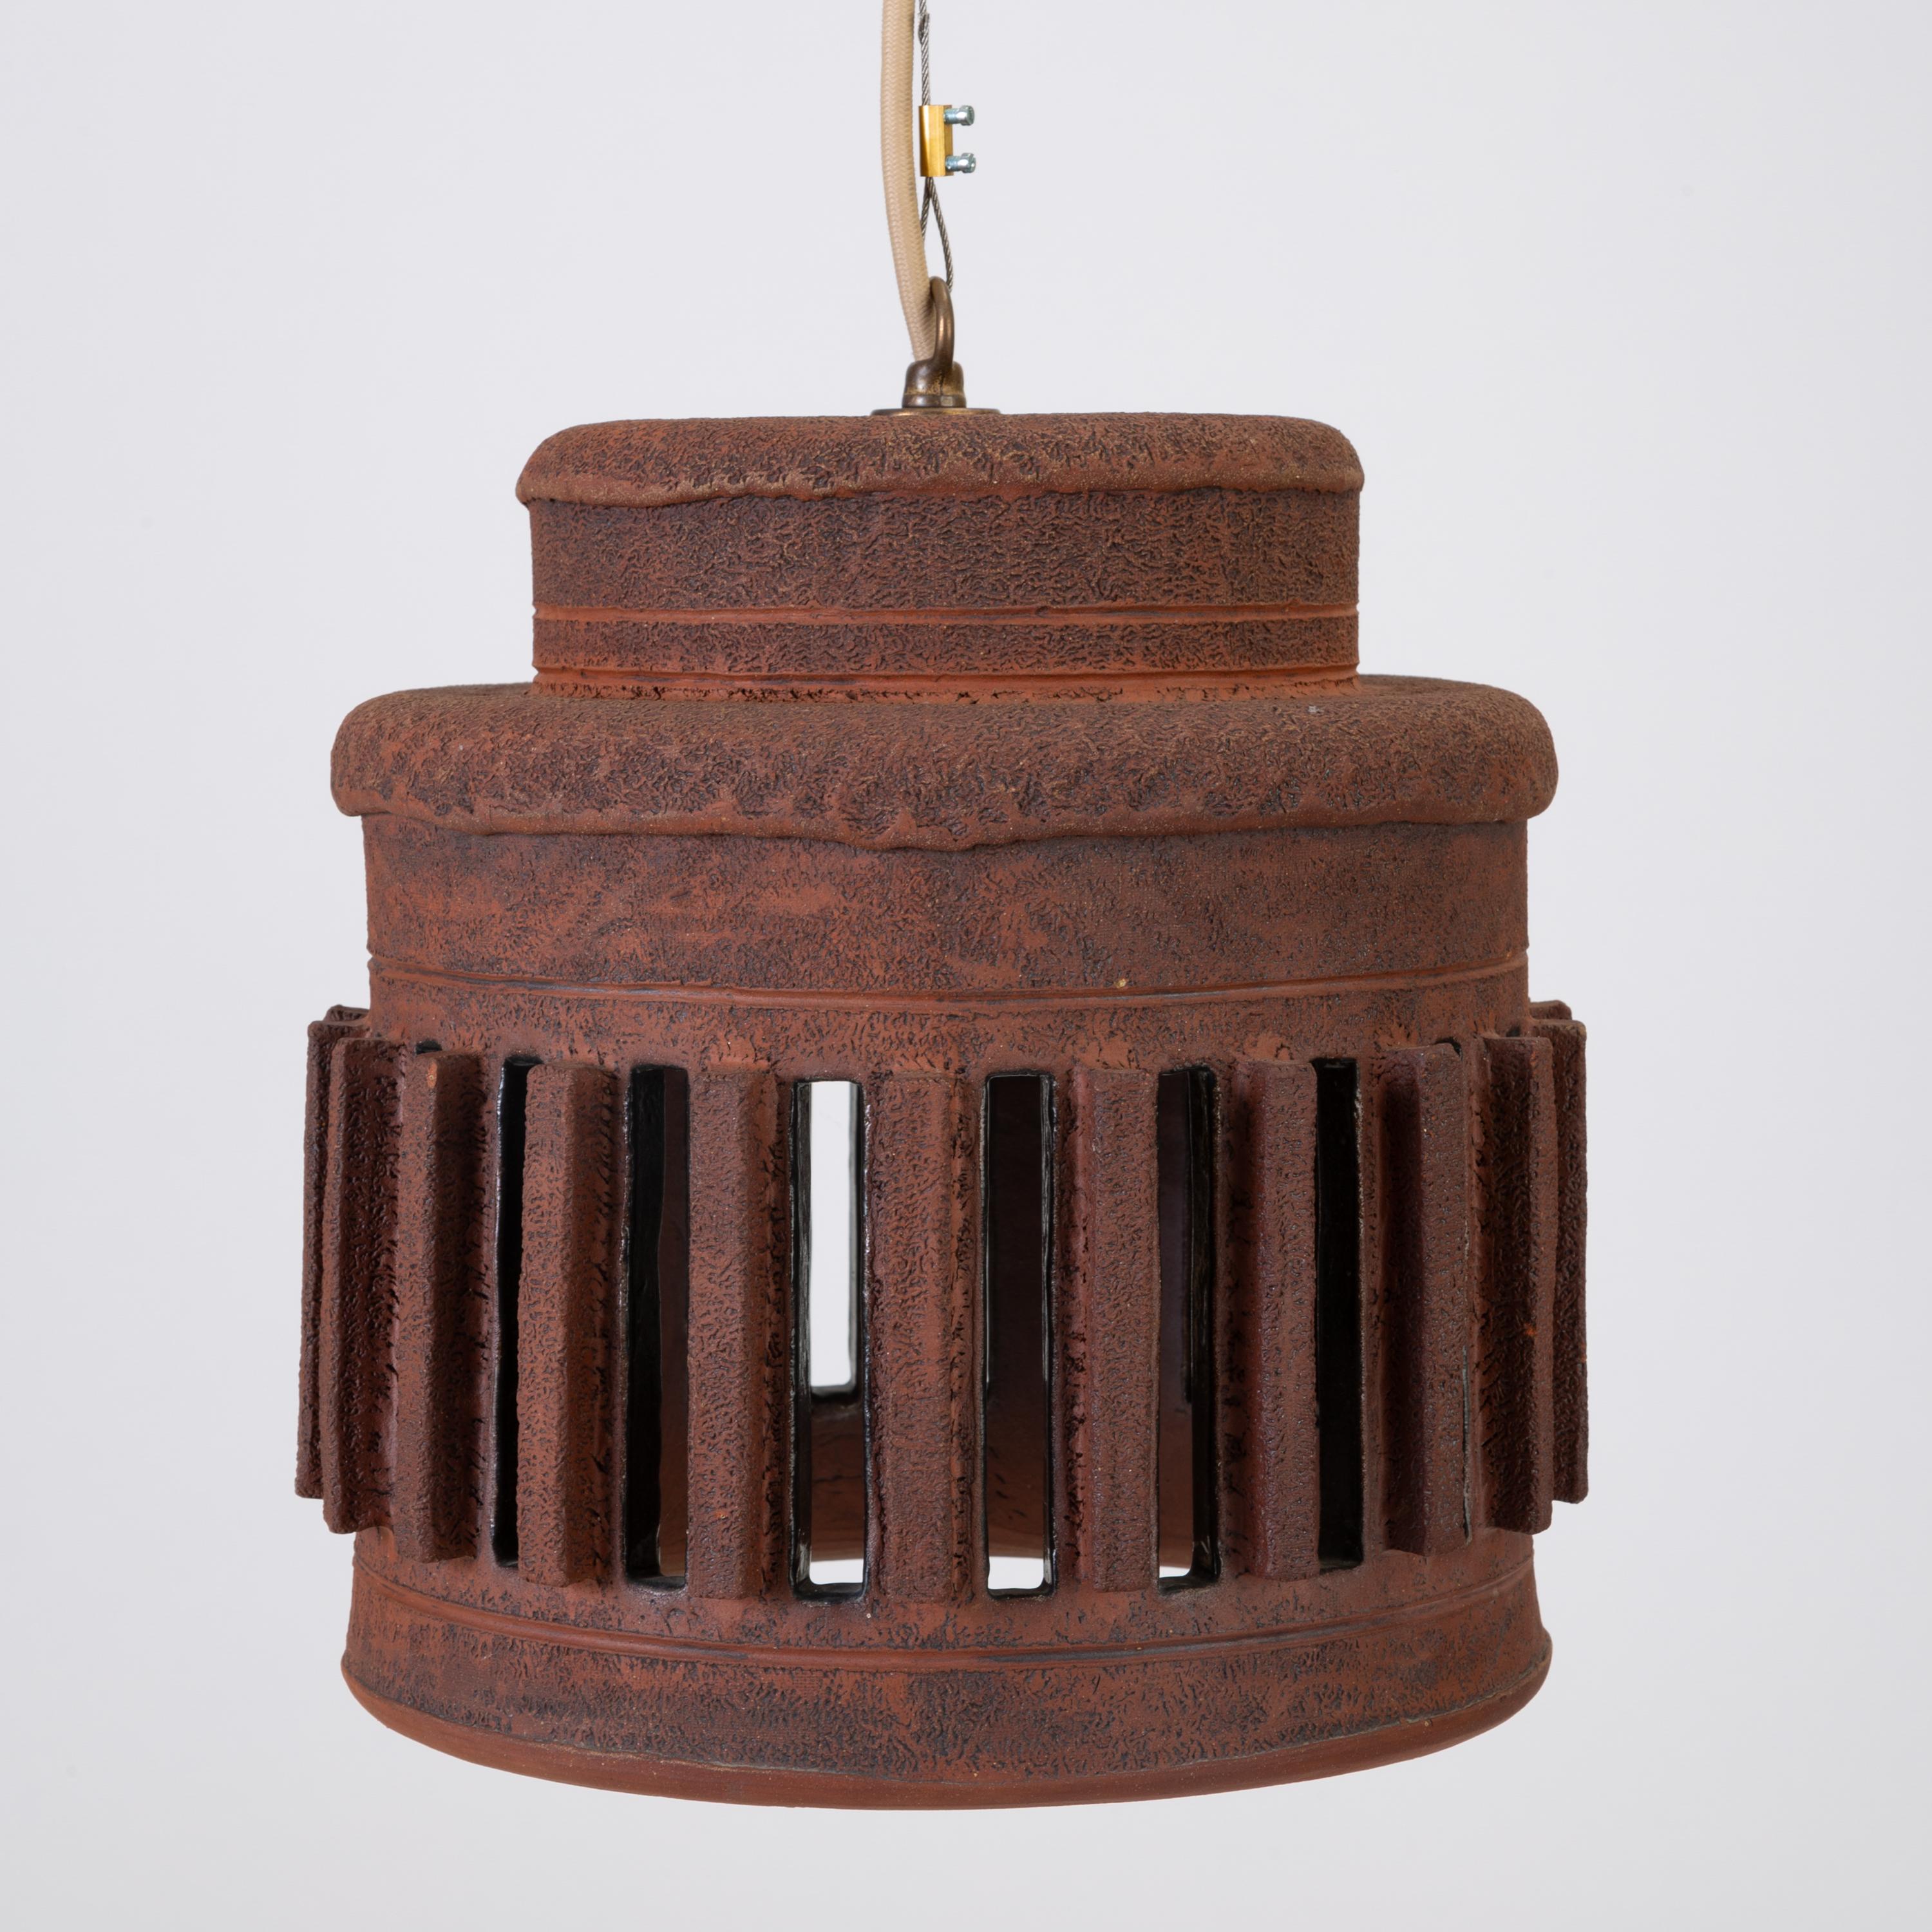 American 1960s California Studio Pottery Drum-Shaped Pendant Light with Raised Vents